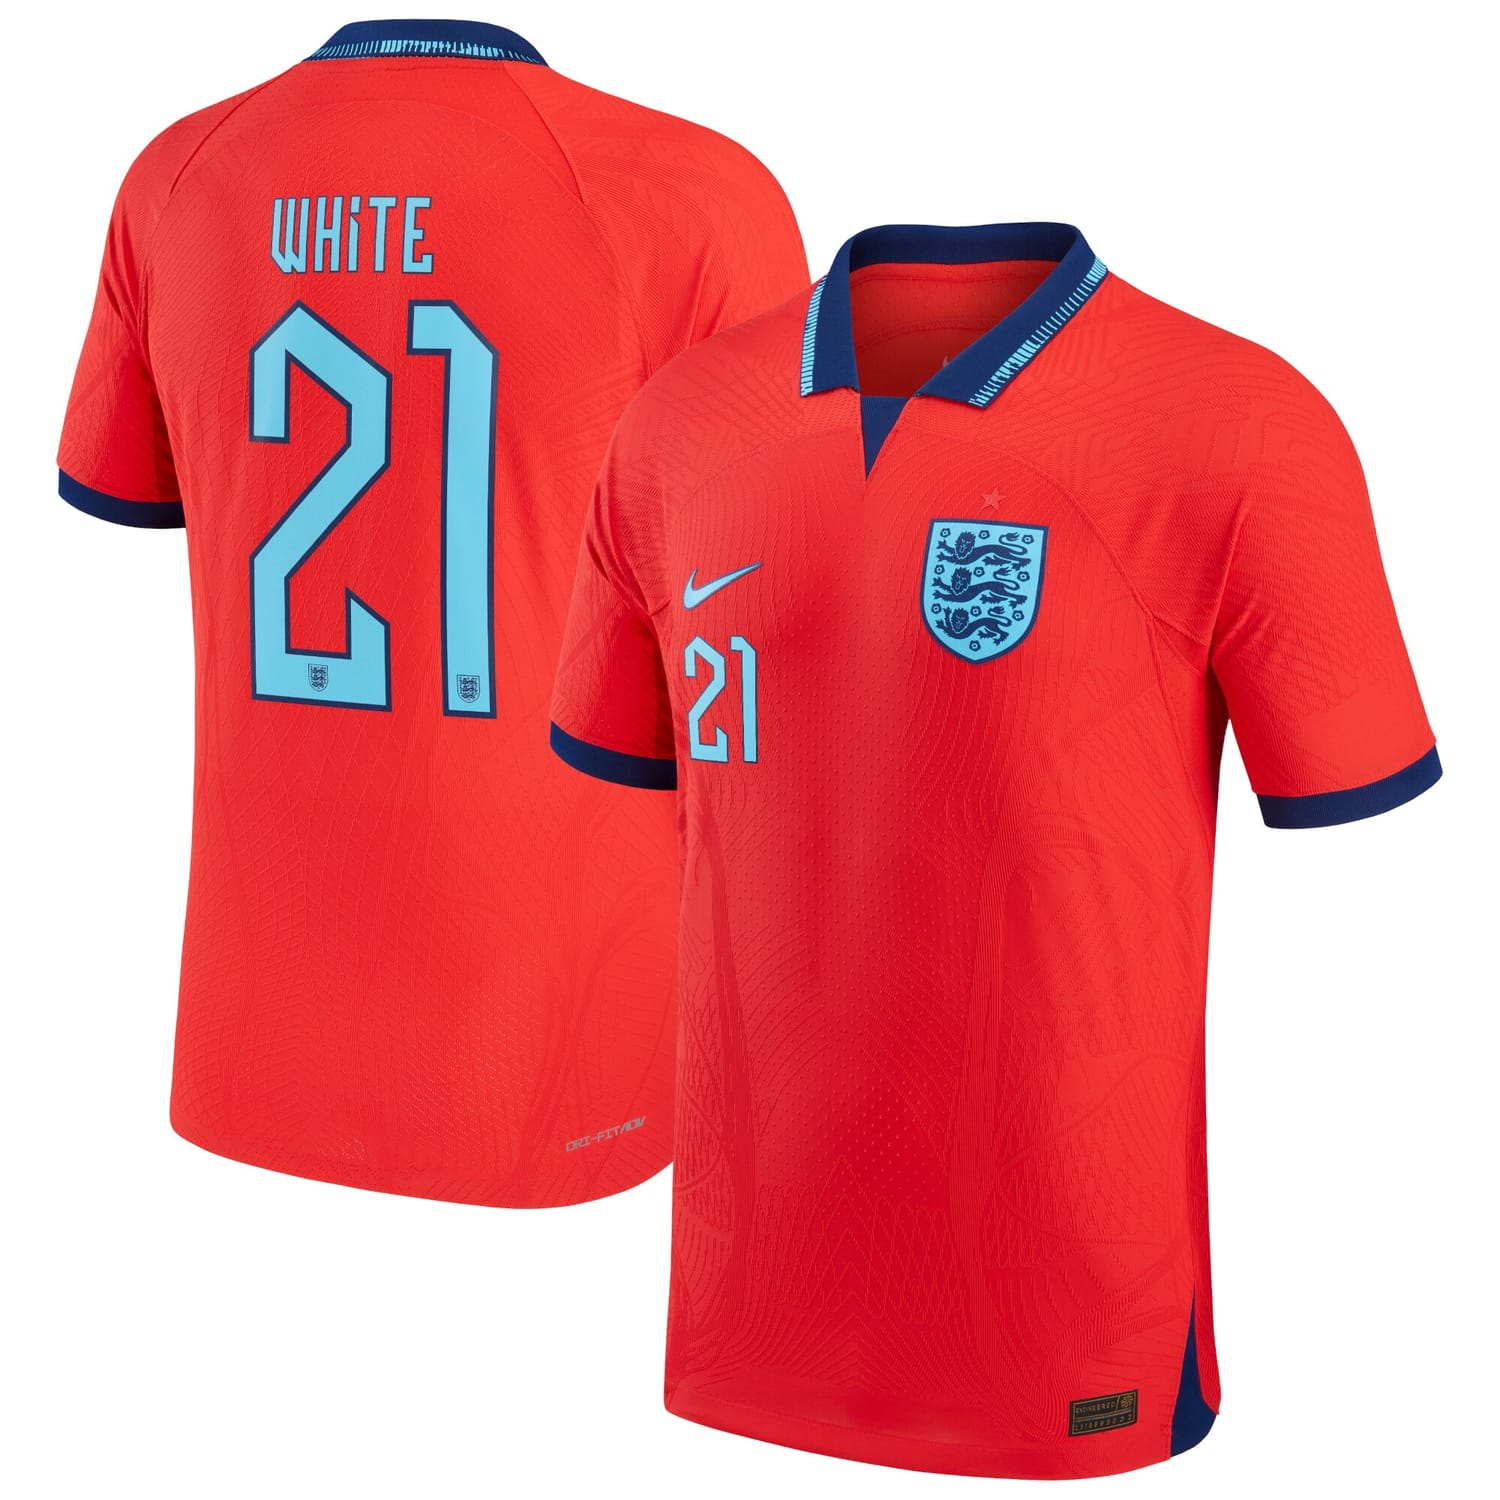 England National Team Away Authentic Jersey Shirt White 2022 player Ben White 21 printing for Men